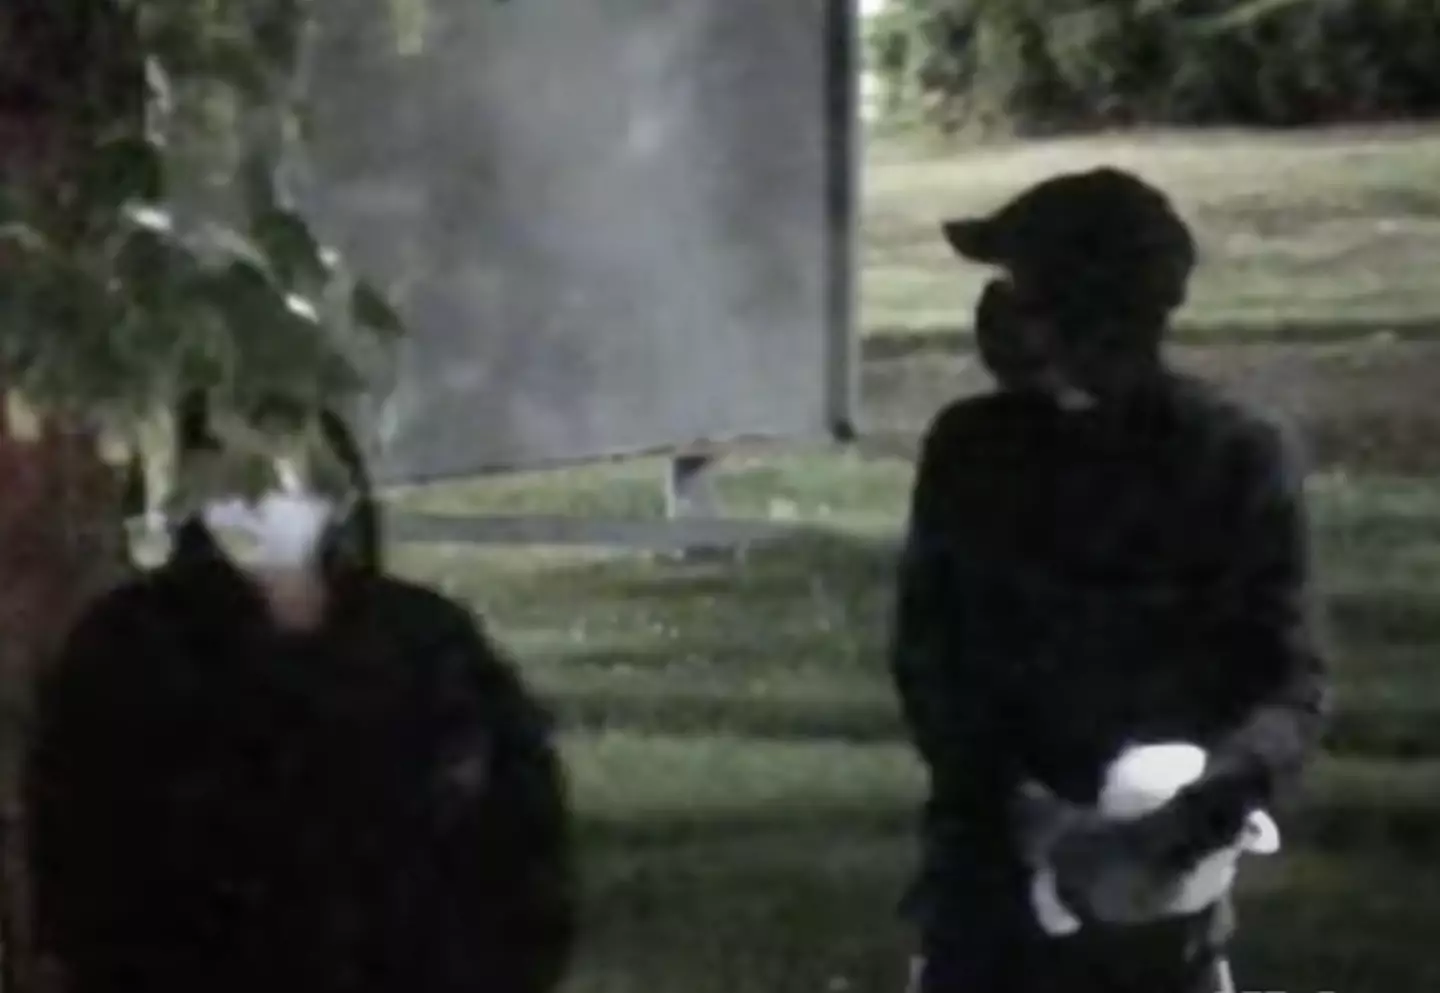 One figure appears to be holding something wrapped in a white plastic bag.